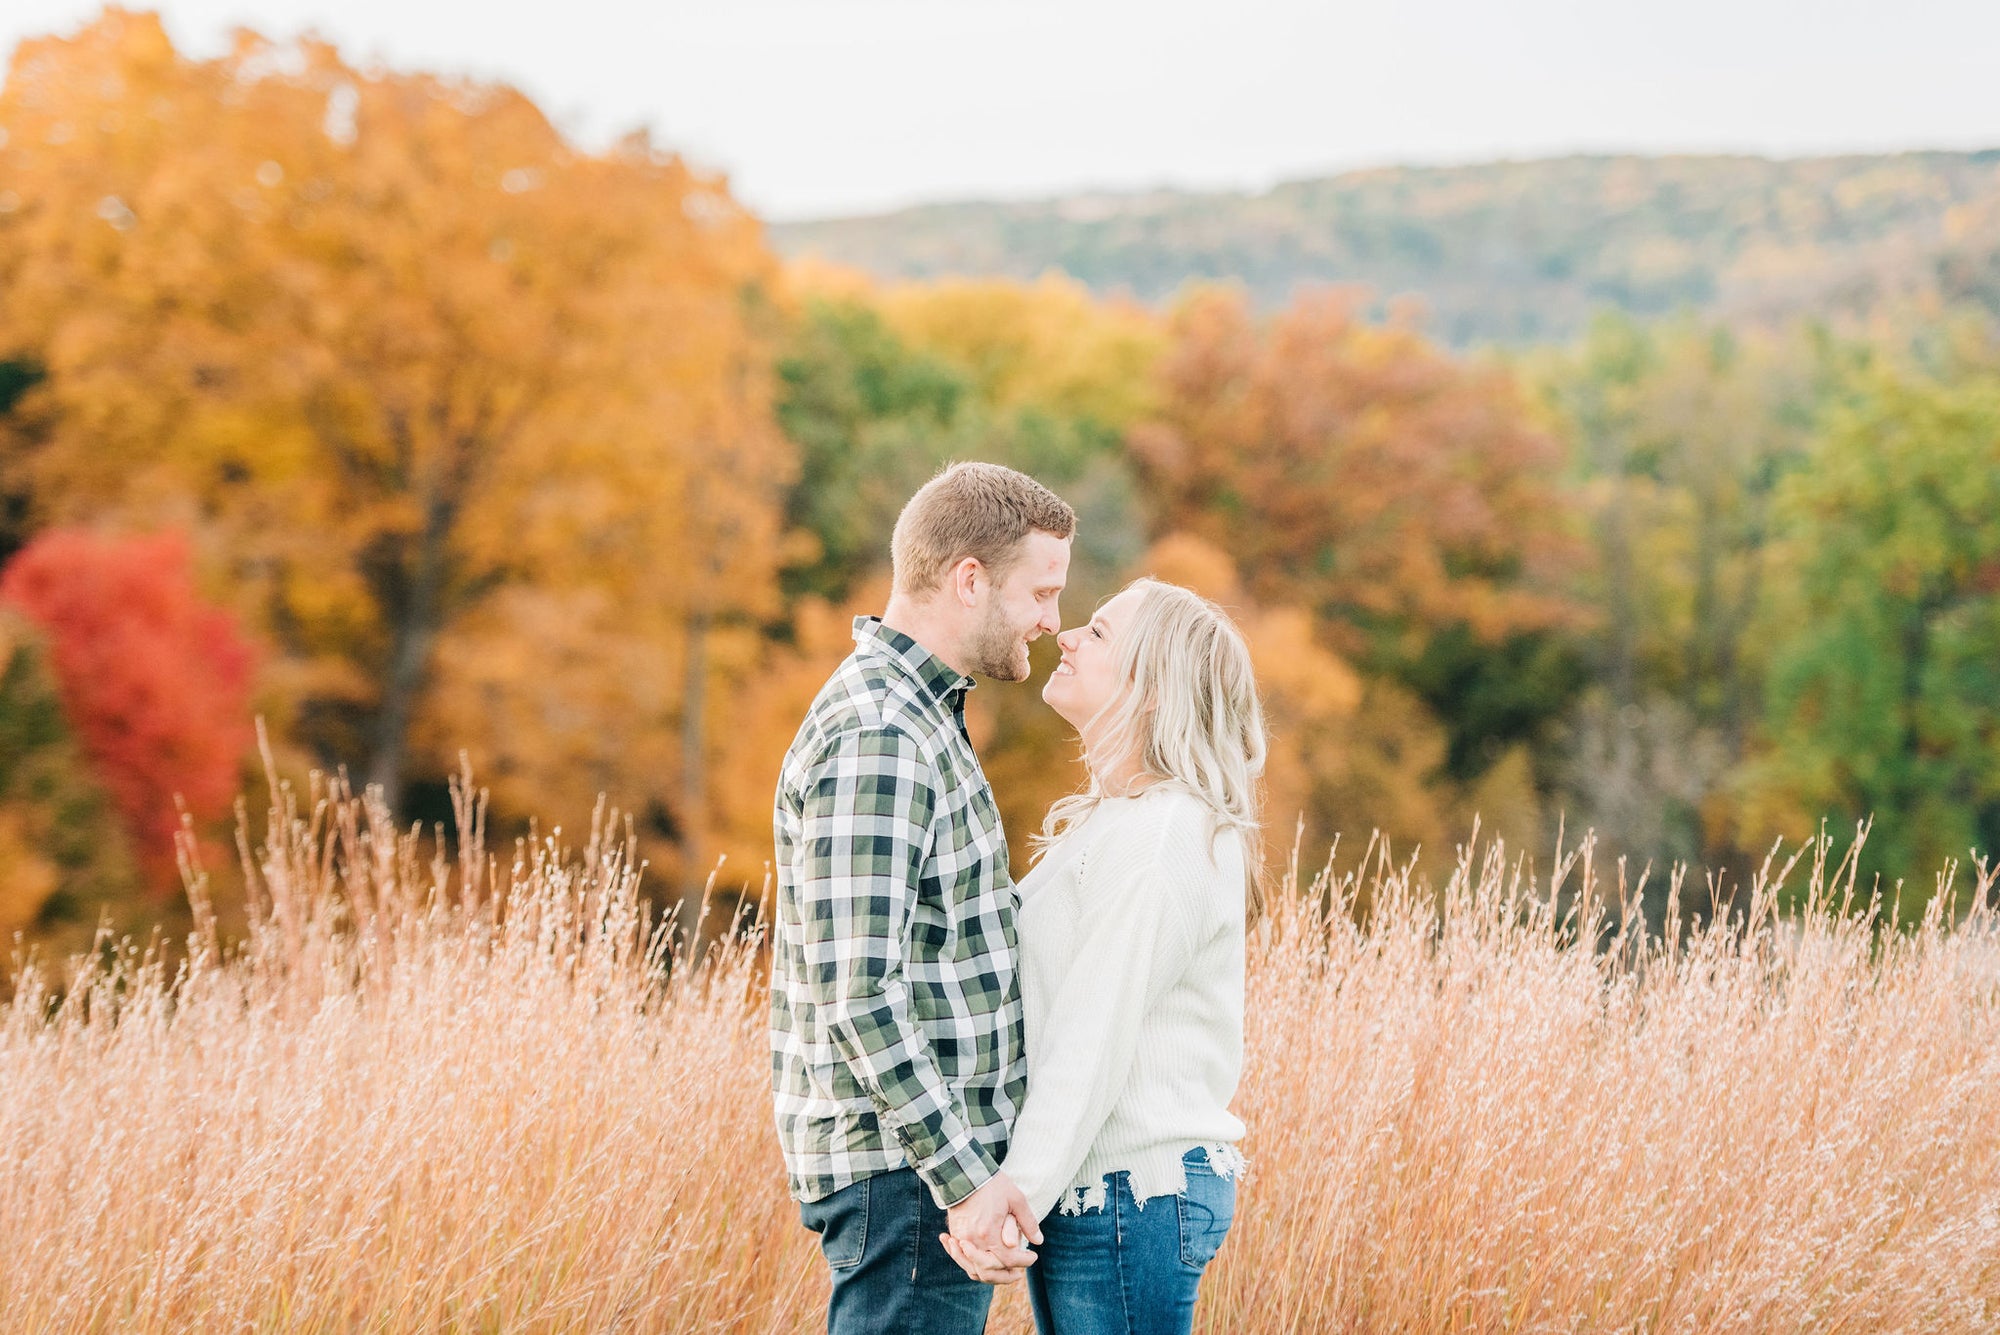 Fall engagement photos at pope farm conservancy